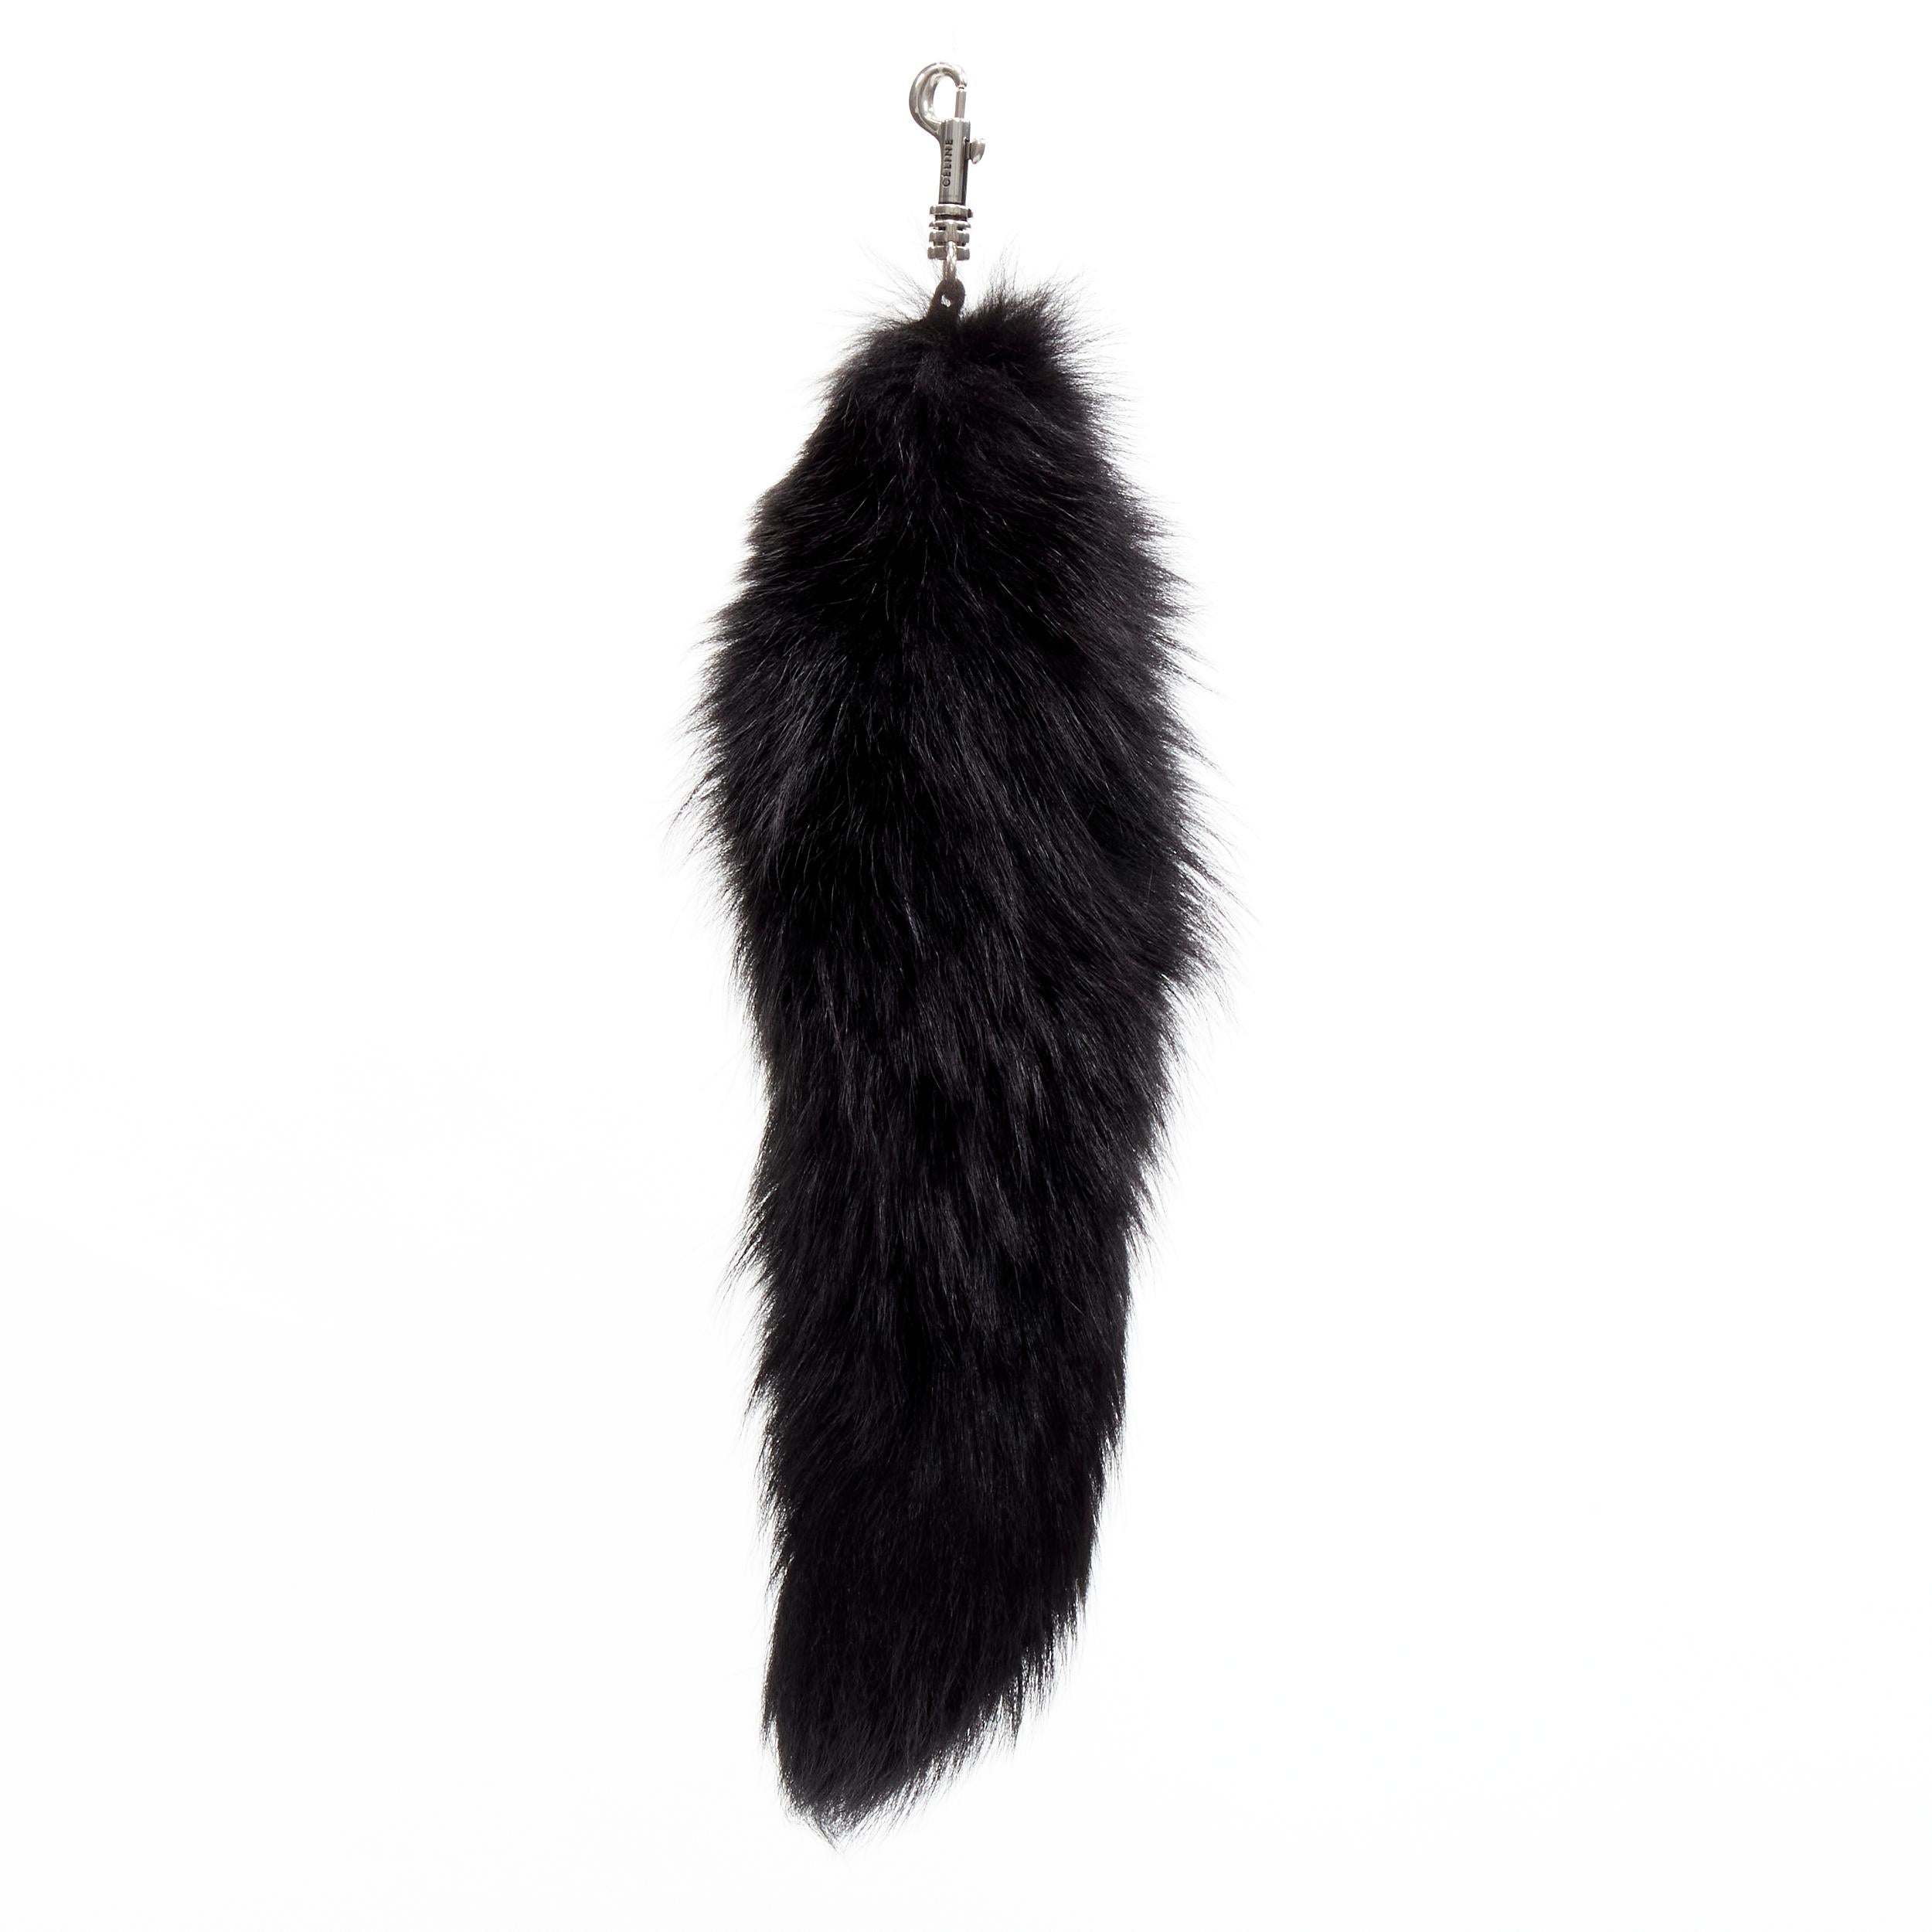 OLD CELINE Phoebe Philo black fox fur tail clasp silver tone keyring bag charm In Excellent Condition For Sale In Hong Kong, NT